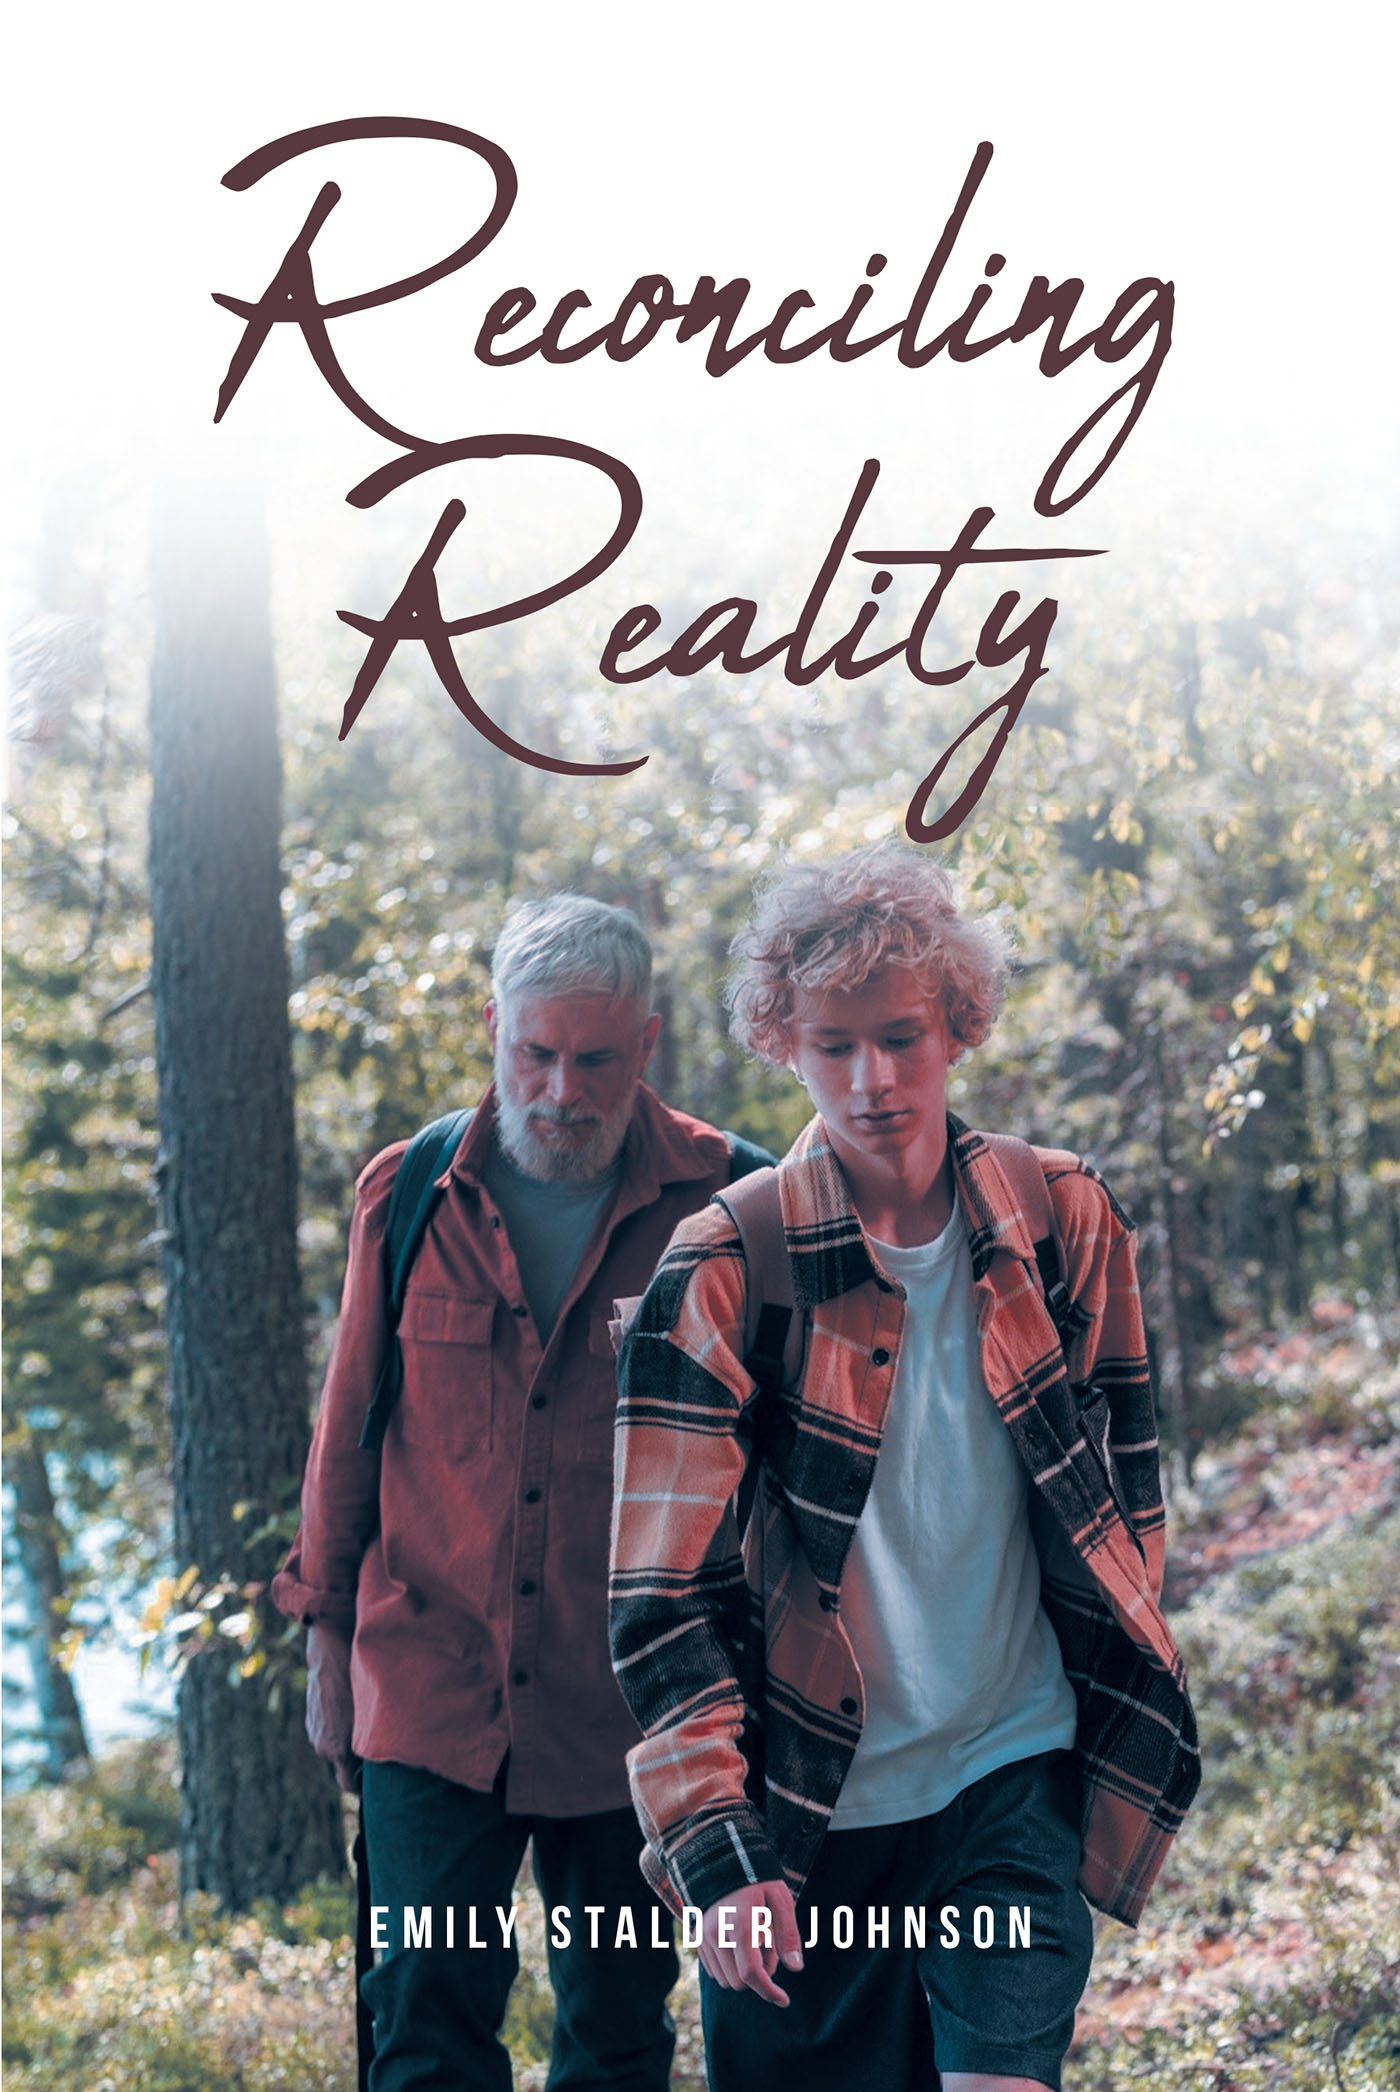 Emily Stalder Johnson’s New Book, "Reconciling Reality," Centers Around a Young Teen Who is Forced to Live with His Uncle and Adapt to Difficult Changes in His Life